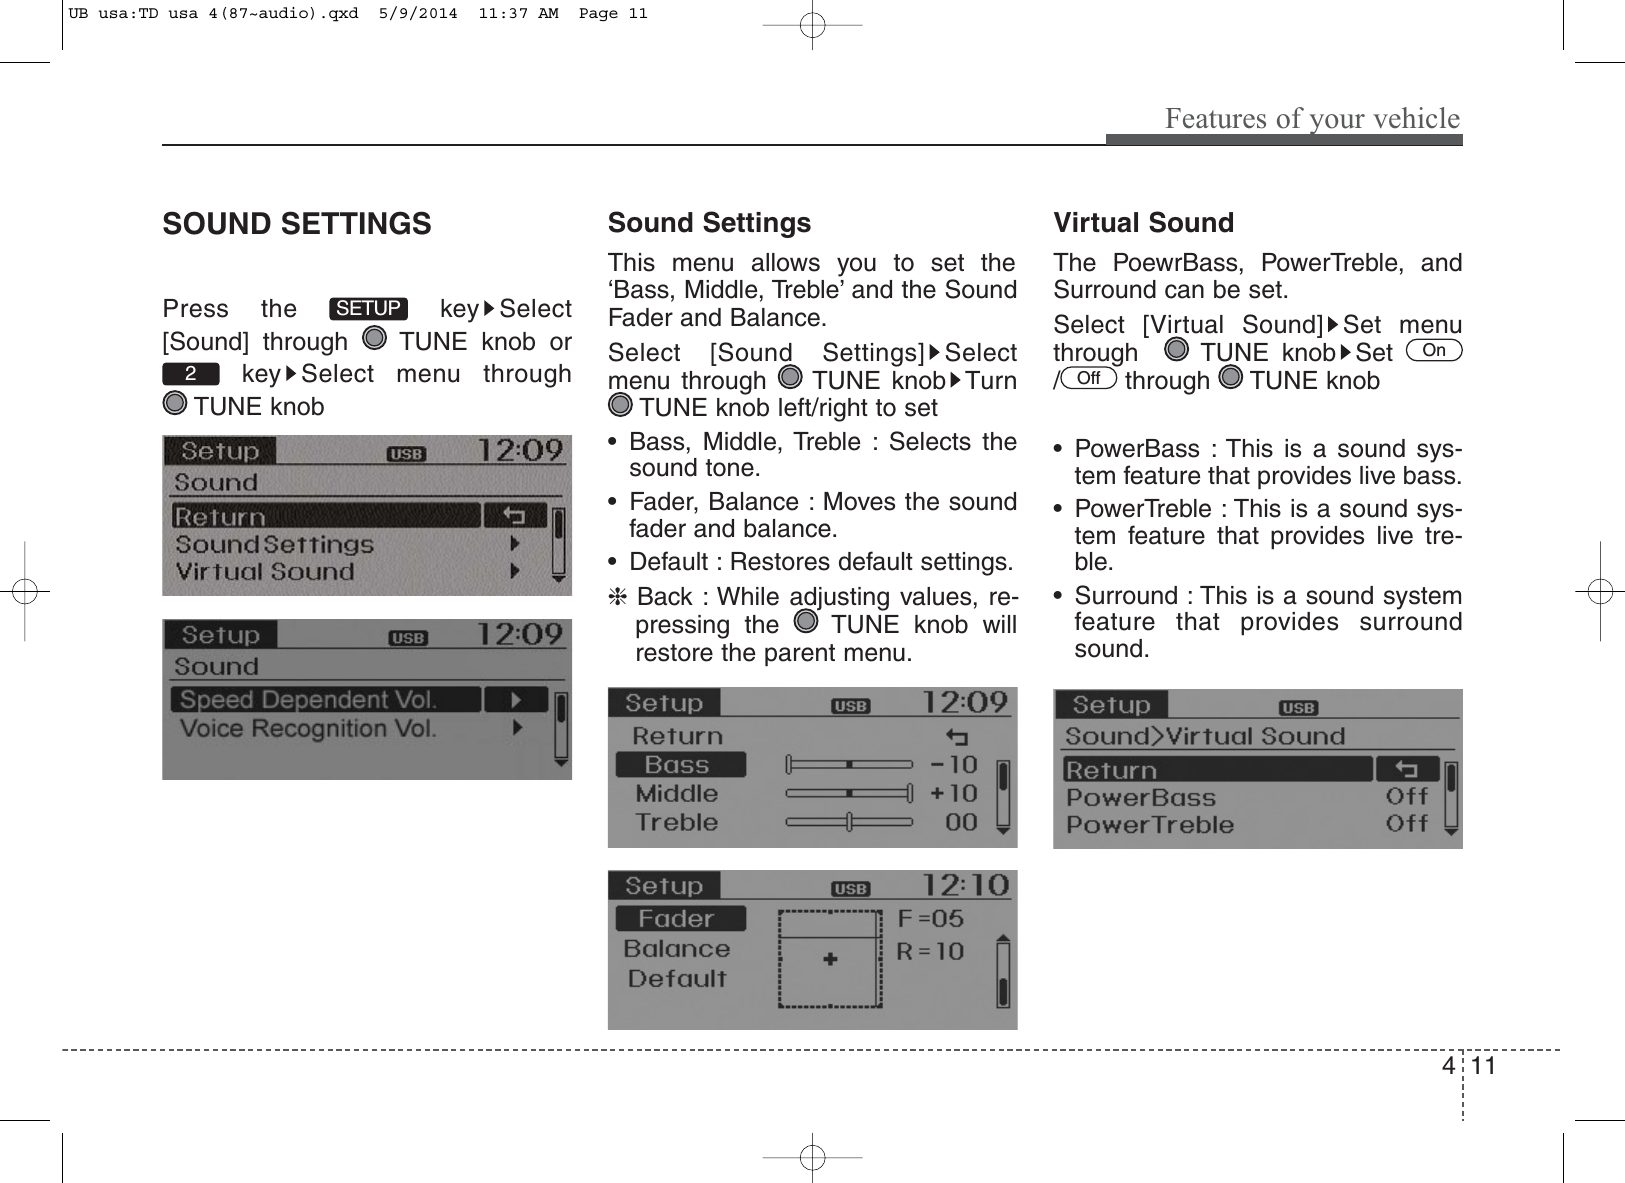 4 11Features of your vehicleSOUND SETTINGSPress the  key Select[Sound] through  TUNE knob orkey Select menu through TUNE knobSound SettingsThis menu allows you to set the‘Bass, Middle, Treble’ and the SoundFader and Balance.Select [Sound Settings] Selectmenu through  TUNE knob TurnTUNE knob left/right to set• Bass, Middle, Treble : Selects thesound tone.• Fader, Balance : Moves the soundfader and balance.• Default : Restores default settings.❈Back : While adjusting values, re-pressing the  TUNE knob willrestore the parent menu.Virtual SoundThe PoewrBass, PowerTreble, andSurround can be set.Select [Virtual Sound] Set menuthrough   TUNE knob Set/ through TUNE knob• PowerBass : This is a sound sys-tem feature that provides live bass.• PowerTreble : This is a sound sys-tem feature that provides live tre-ble.• Surround : This is a sound systemfeature that provides surroundsound.OffOn2SETUPUB usa:TD usa 4(87~audio).qxd  5/9/2014  11:37 AM  Page 11